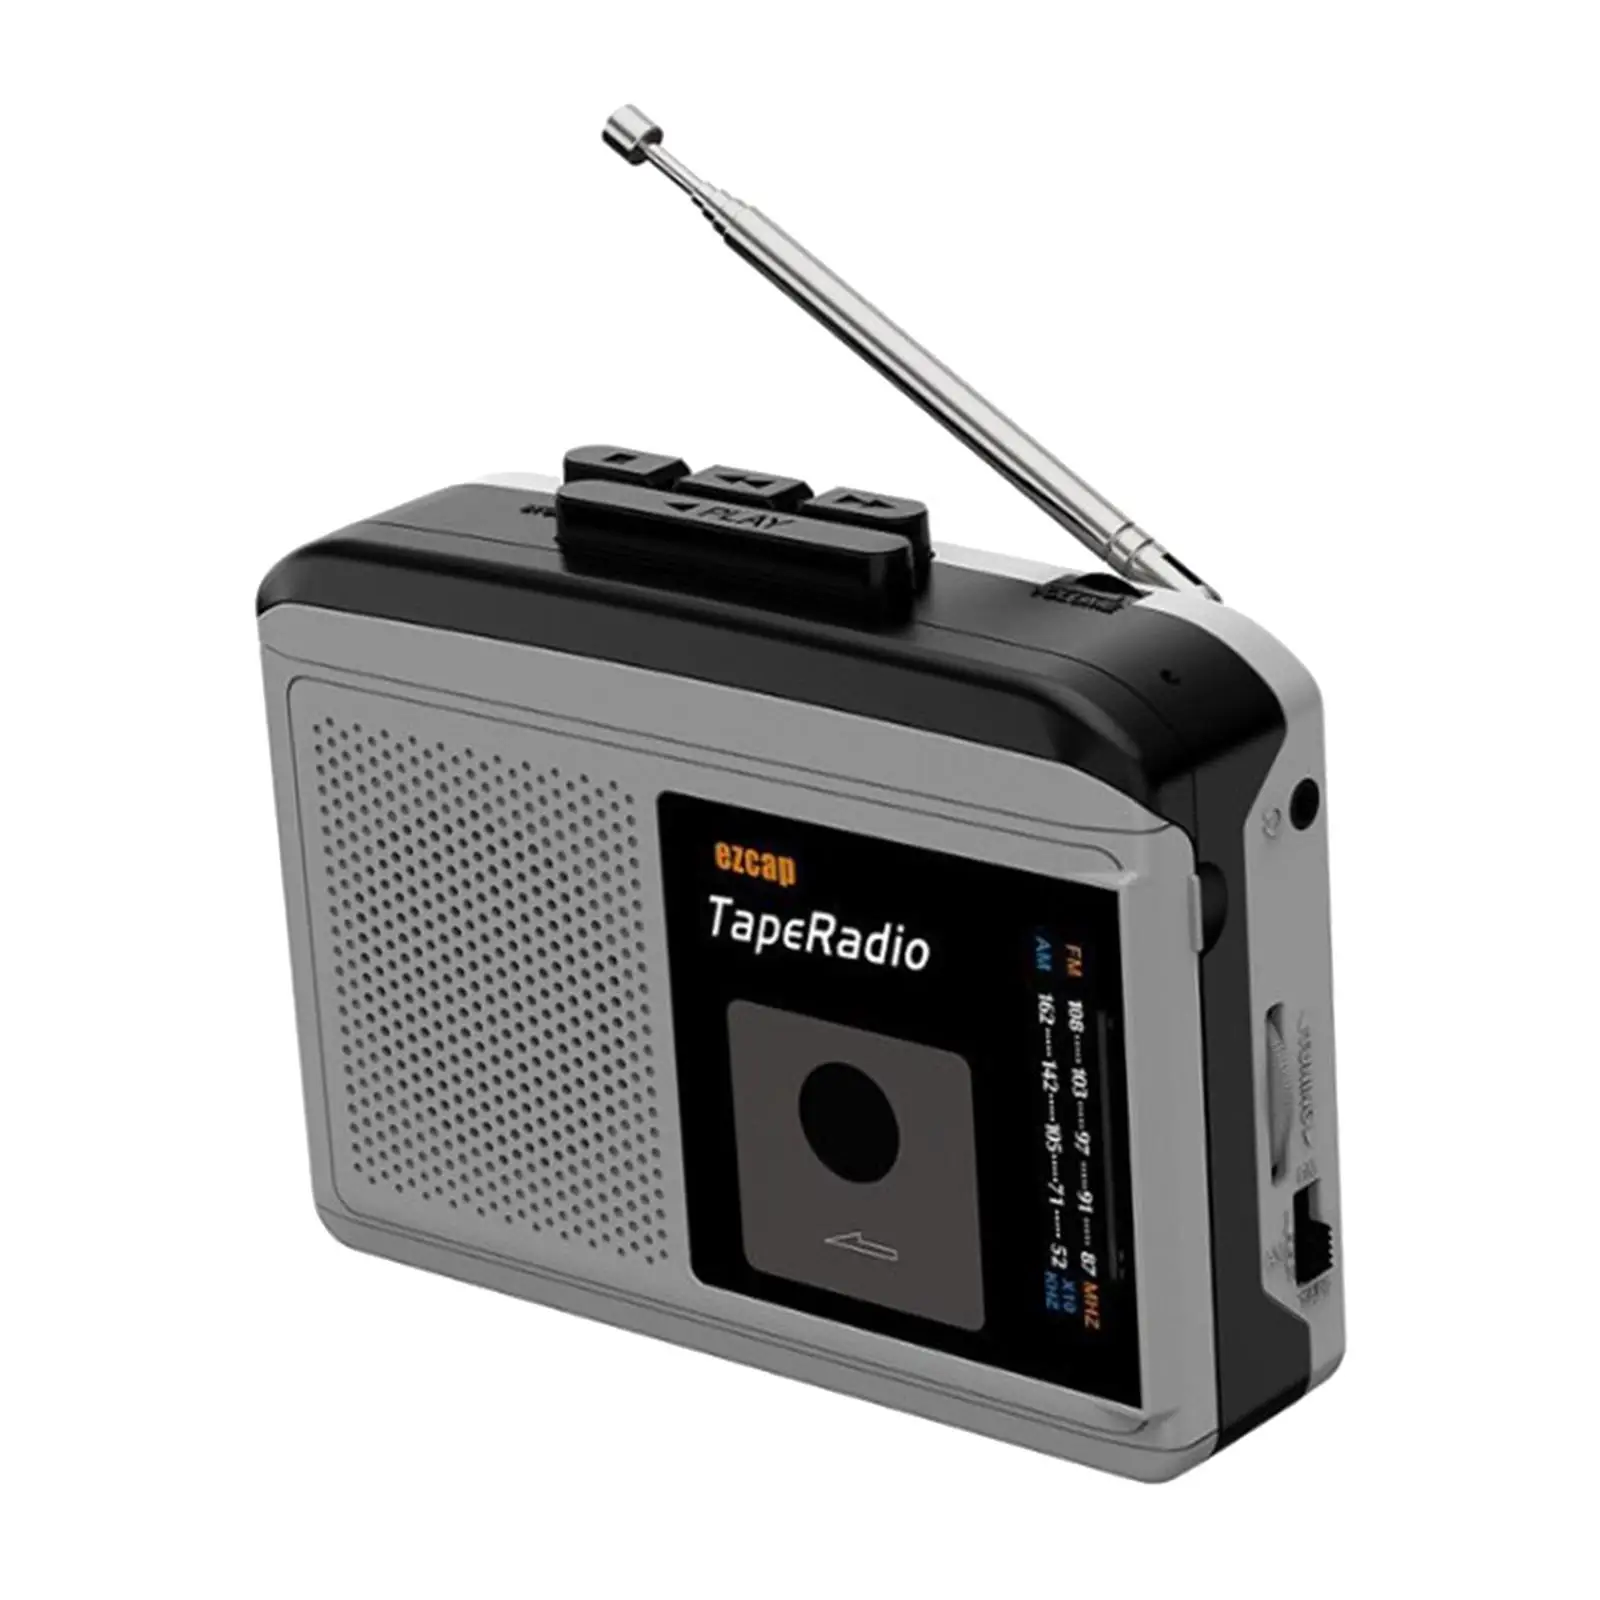 Cassette Player Built-in Speaker Earphone Music Radio Audio Personal 2AA Battery or USB Power Supply Tape Player AM/FM Radio